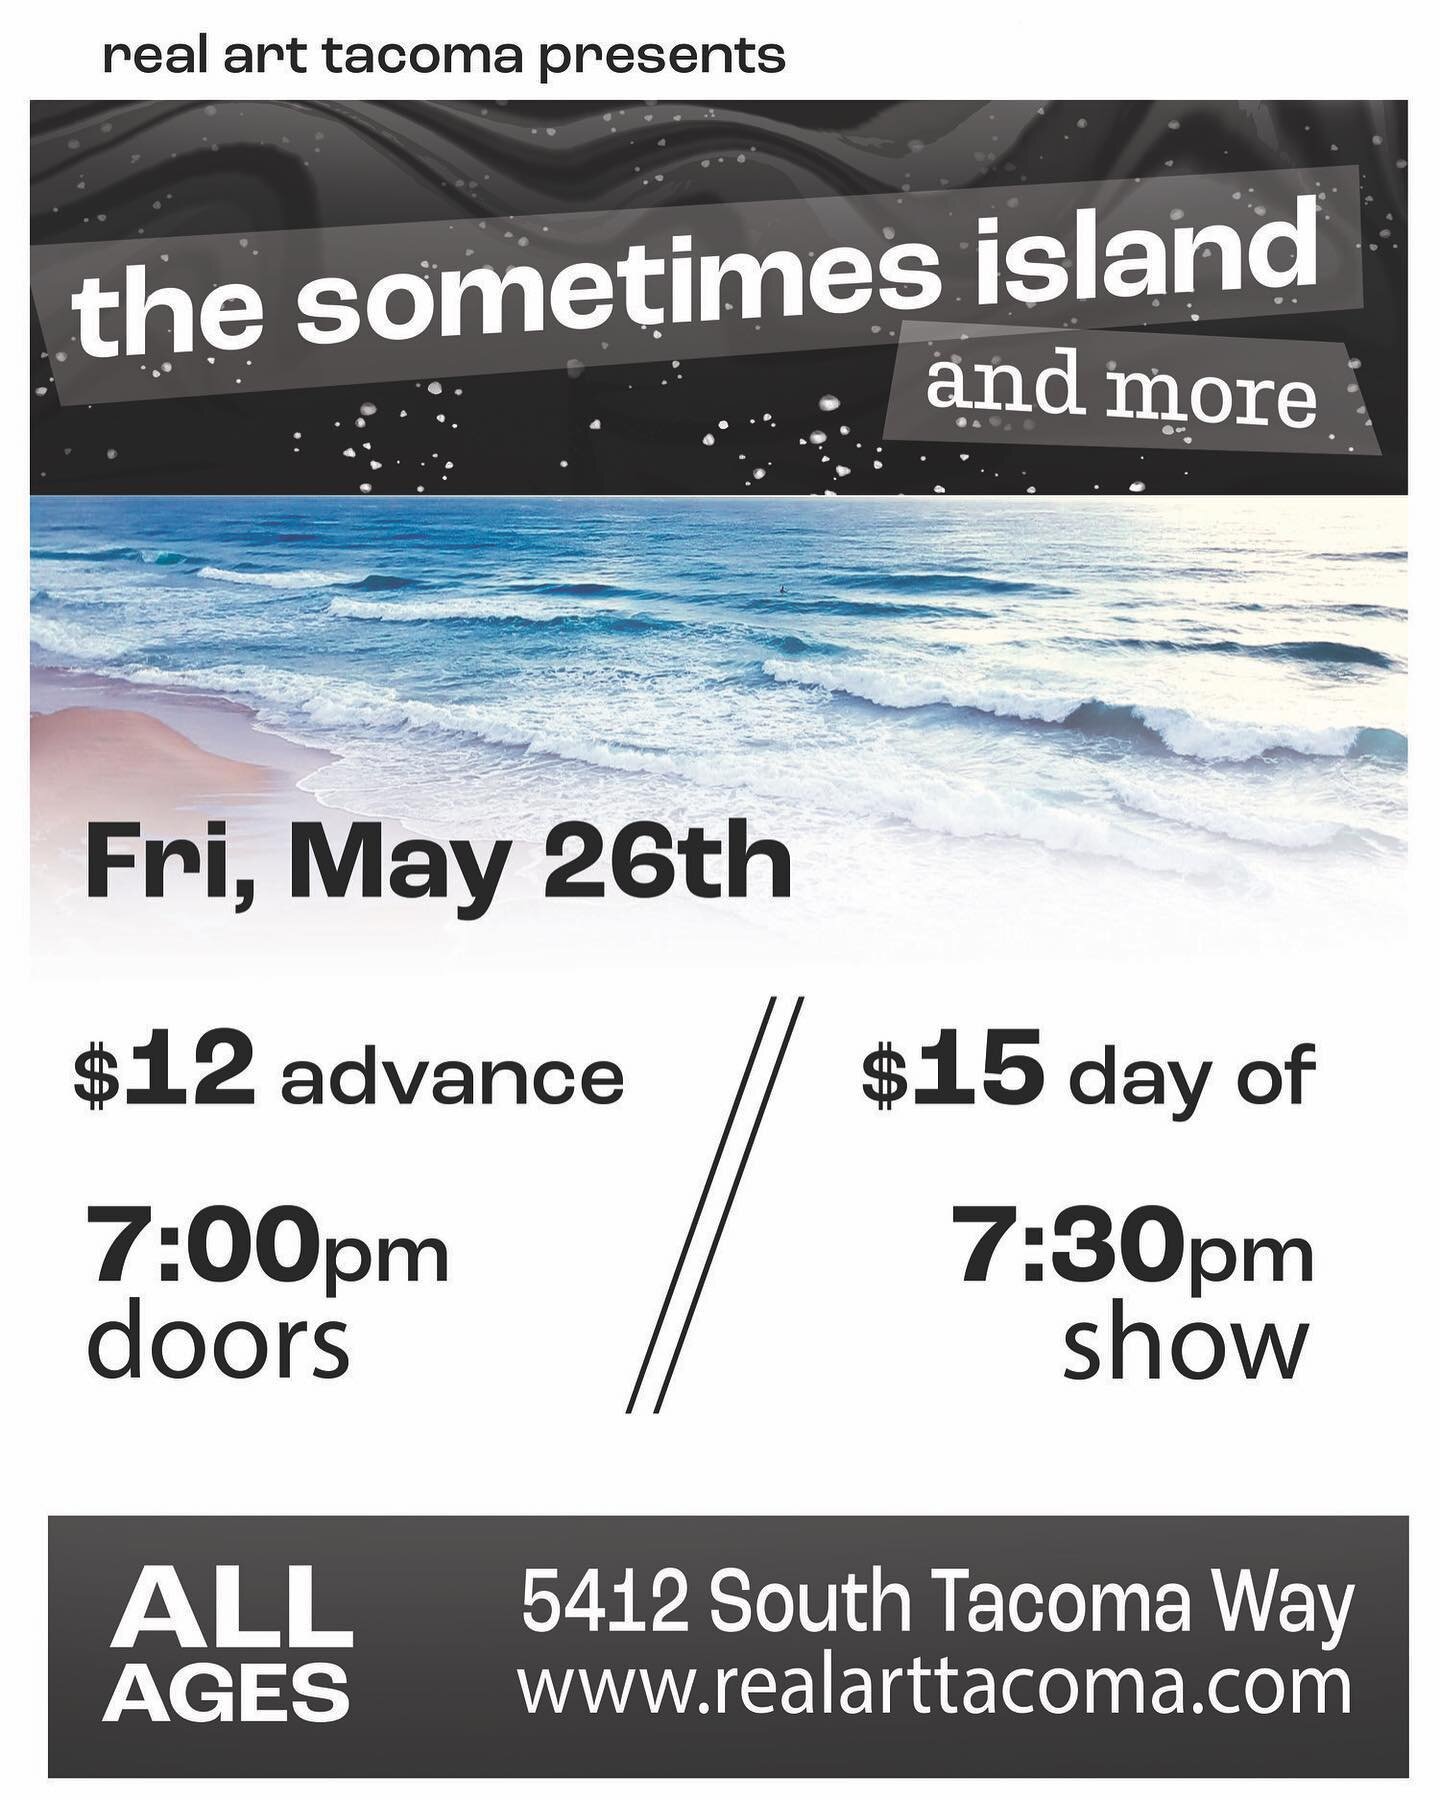 Friday, May 26th 2023

Real Art Tacoma Presents: 

The Sometimes Island,
Pink Boa, 
Kid Huxley, 
Emergency Brake

$12 ADV // $15 DOS
7:00pm Doors // 7:30pm Show
ALL AGES

****Reminder that Real Art is a 100% Drug &amp; Alcohol free venue space. All a